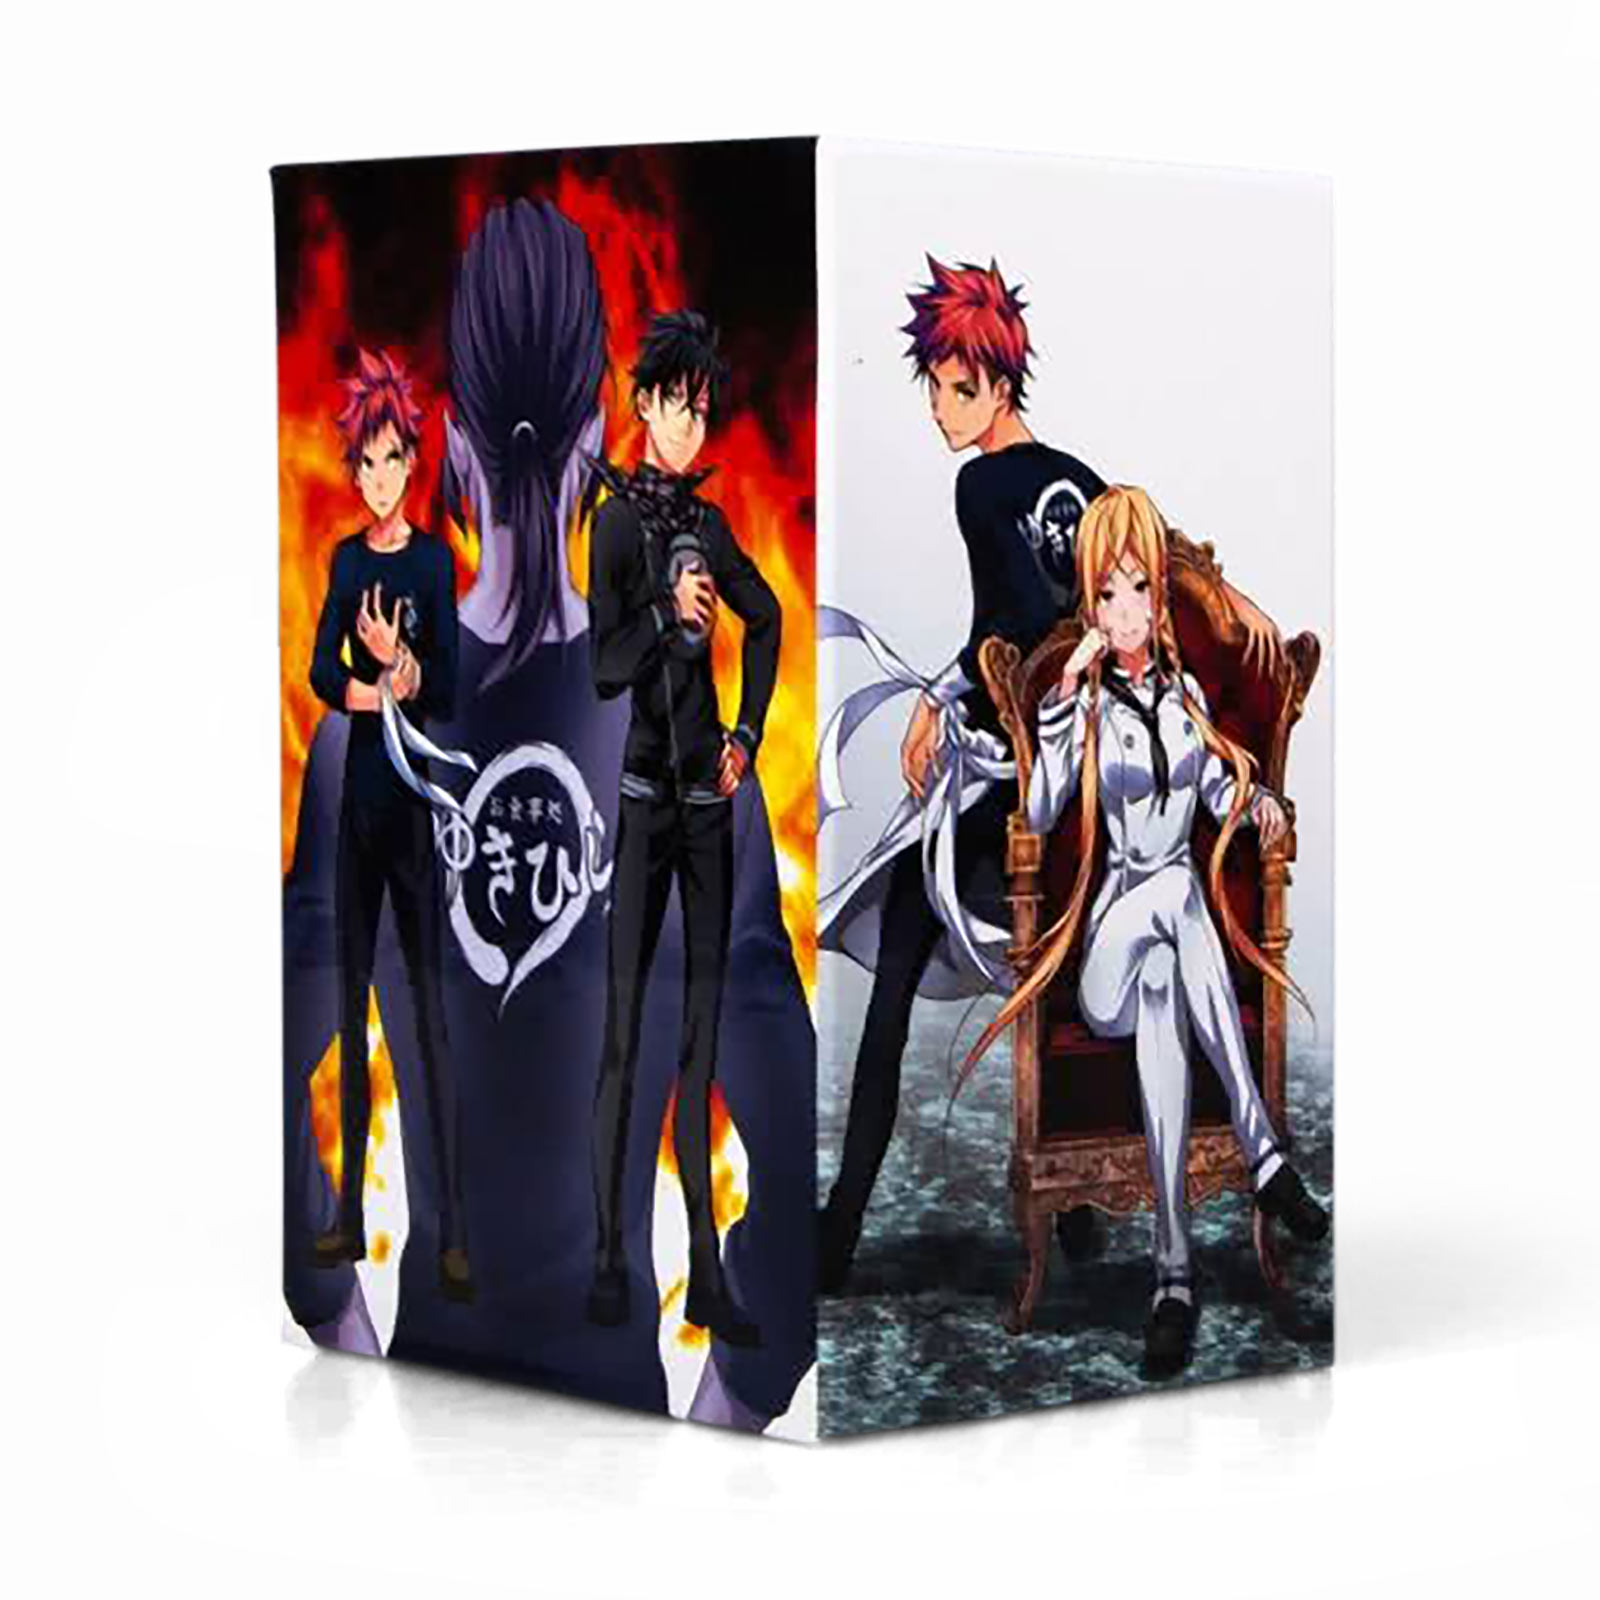 Food Wars - Shokugeki No Soma Volume 31-36 in Collector's Box with Extra